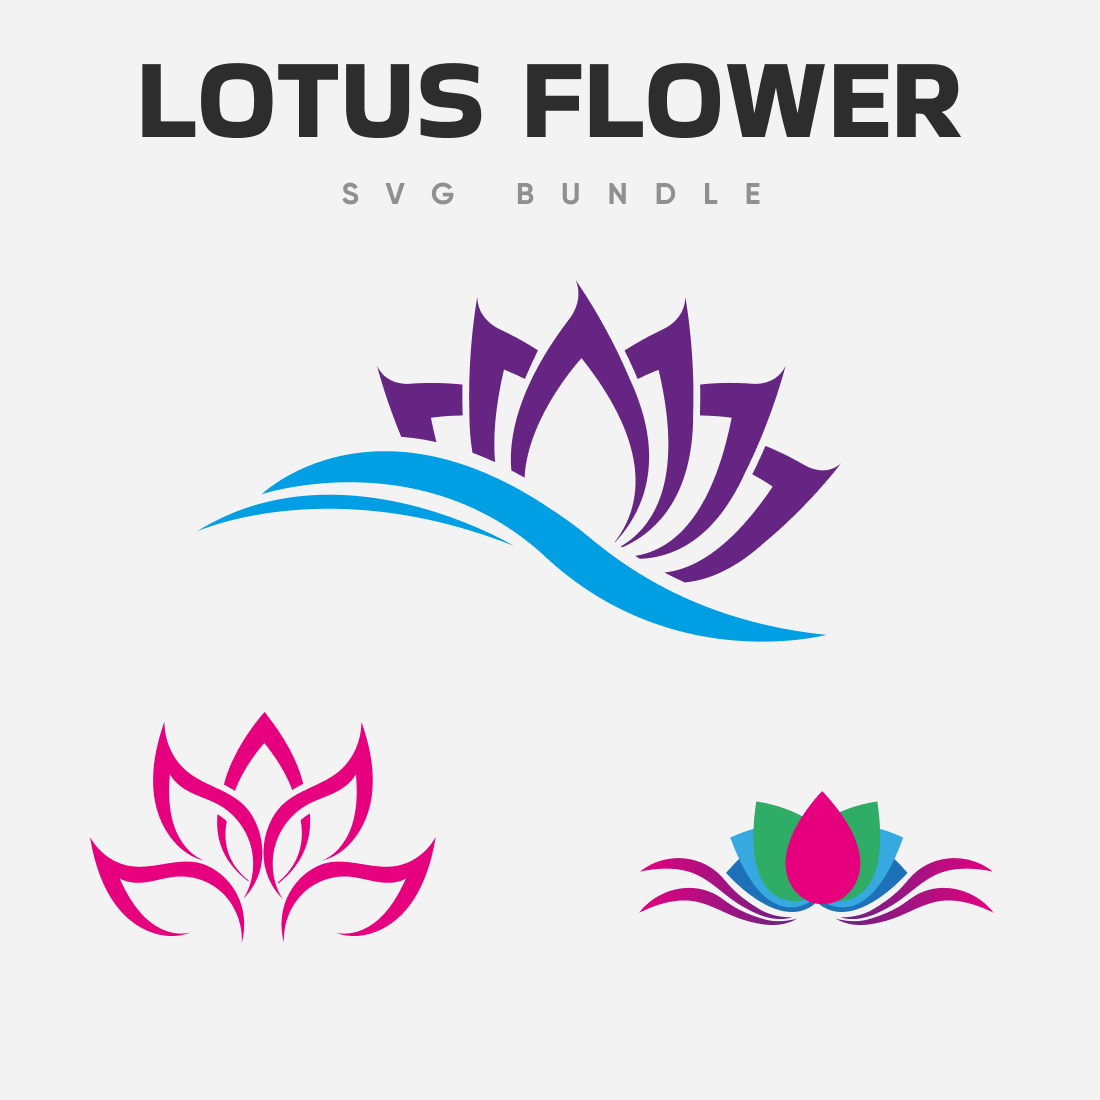 Large purple lotus flower and two smaller lotus flowers in pink.